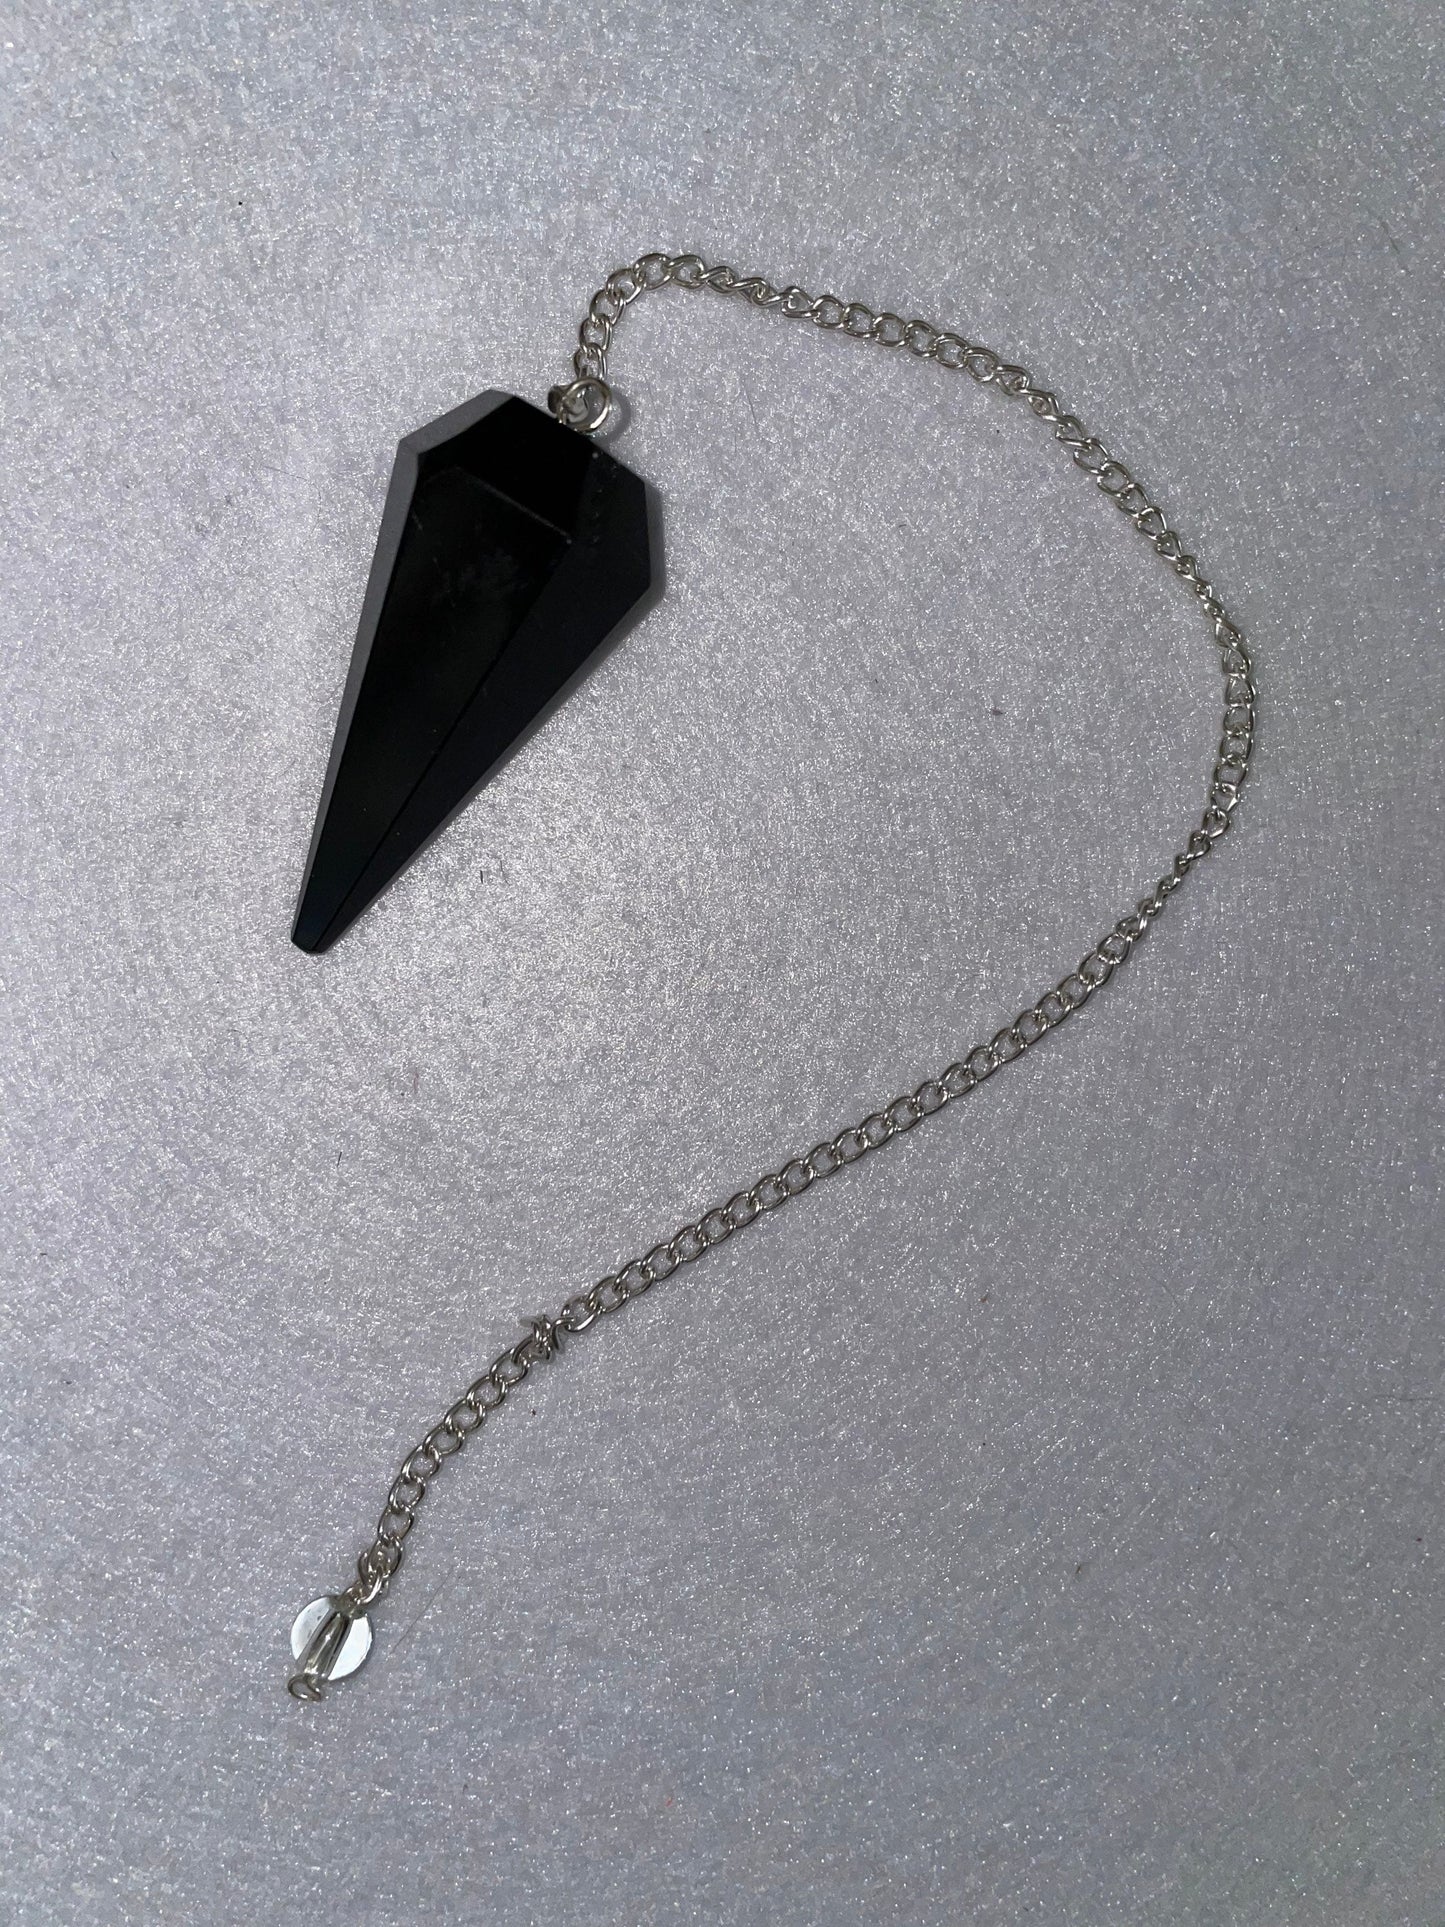 Black Obsidian Pendulum is  1.65” and with chain is 9”